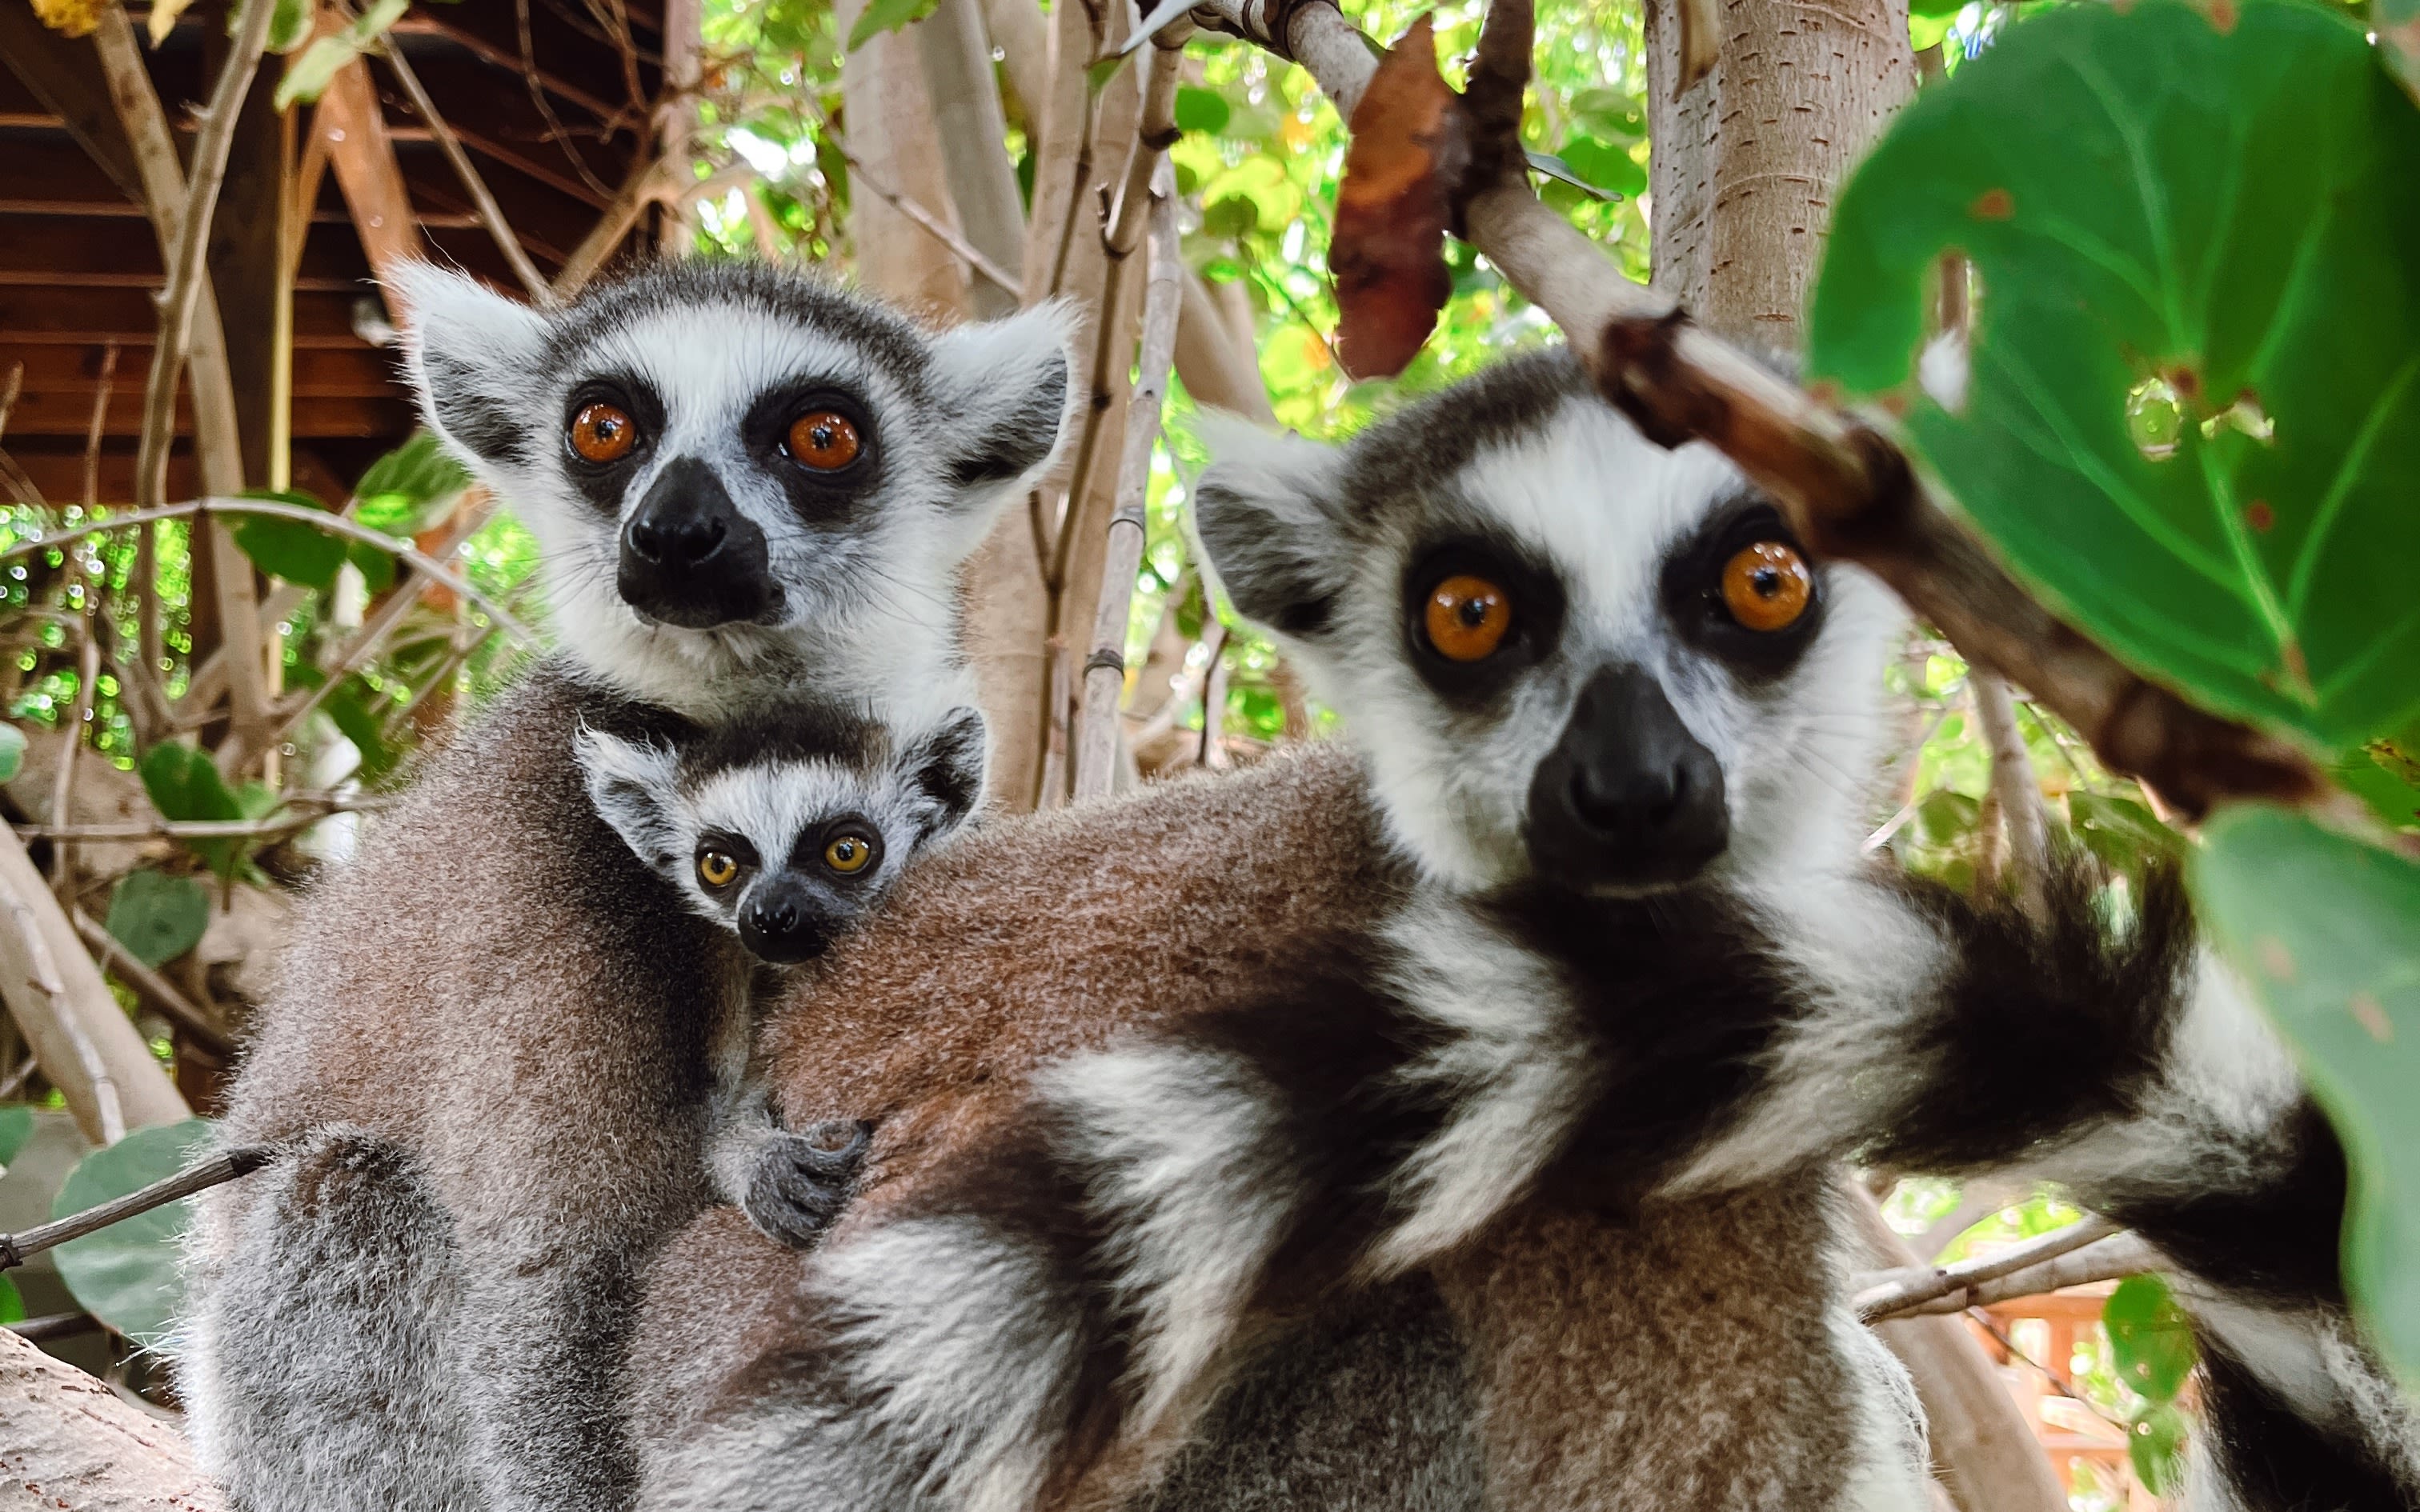 An image of a family of lemurs in Necker Island